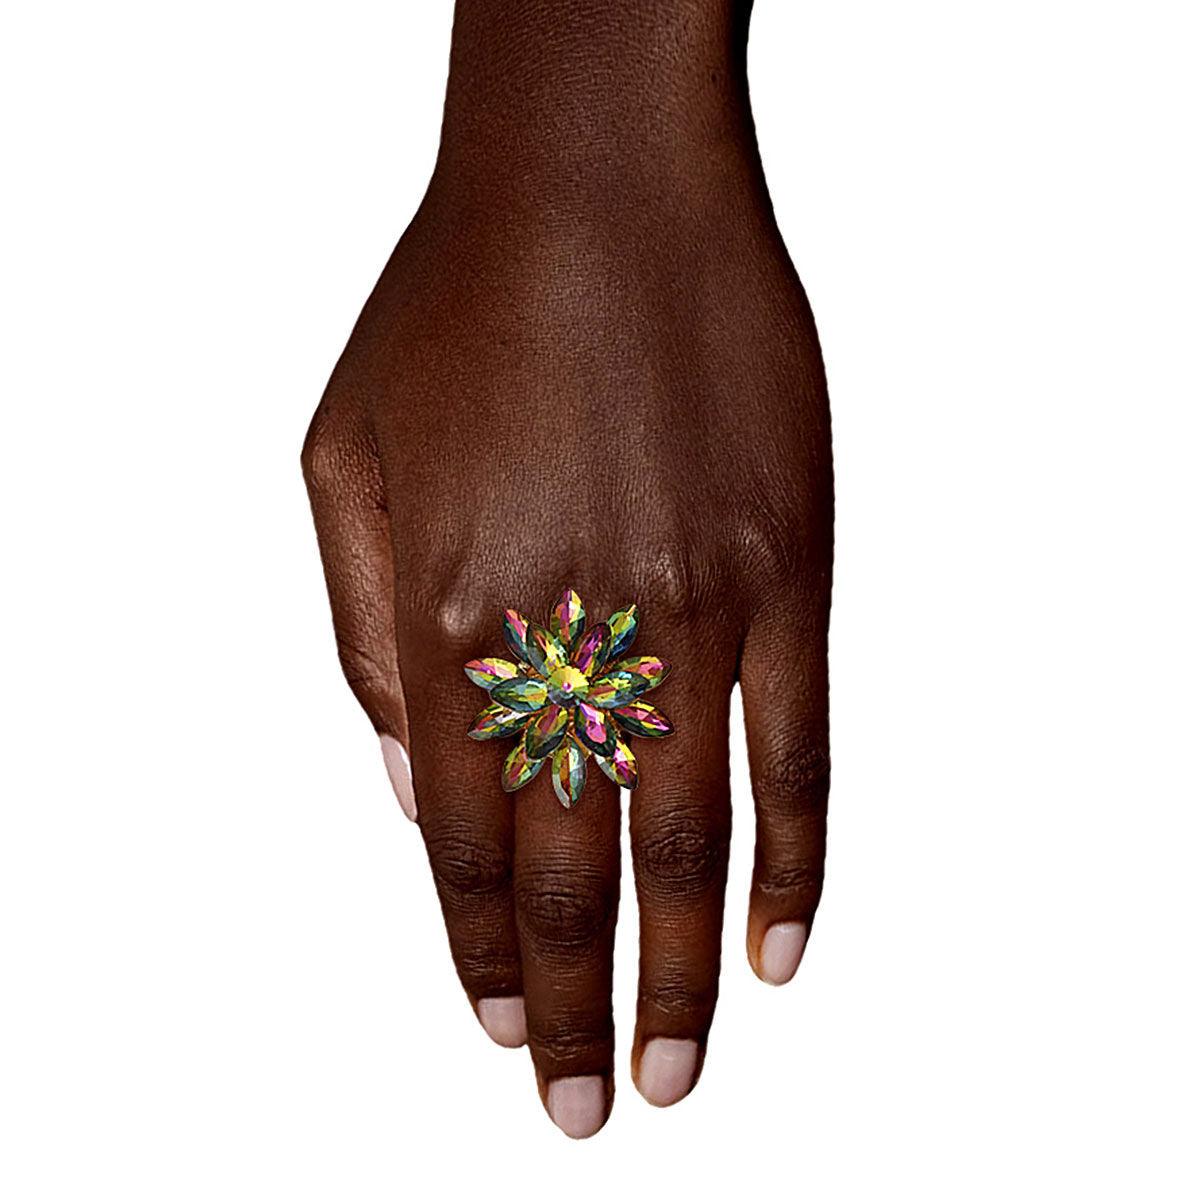 Stack 'Em Up: Flower Fashion Ring That Scream 'Look At Me!'